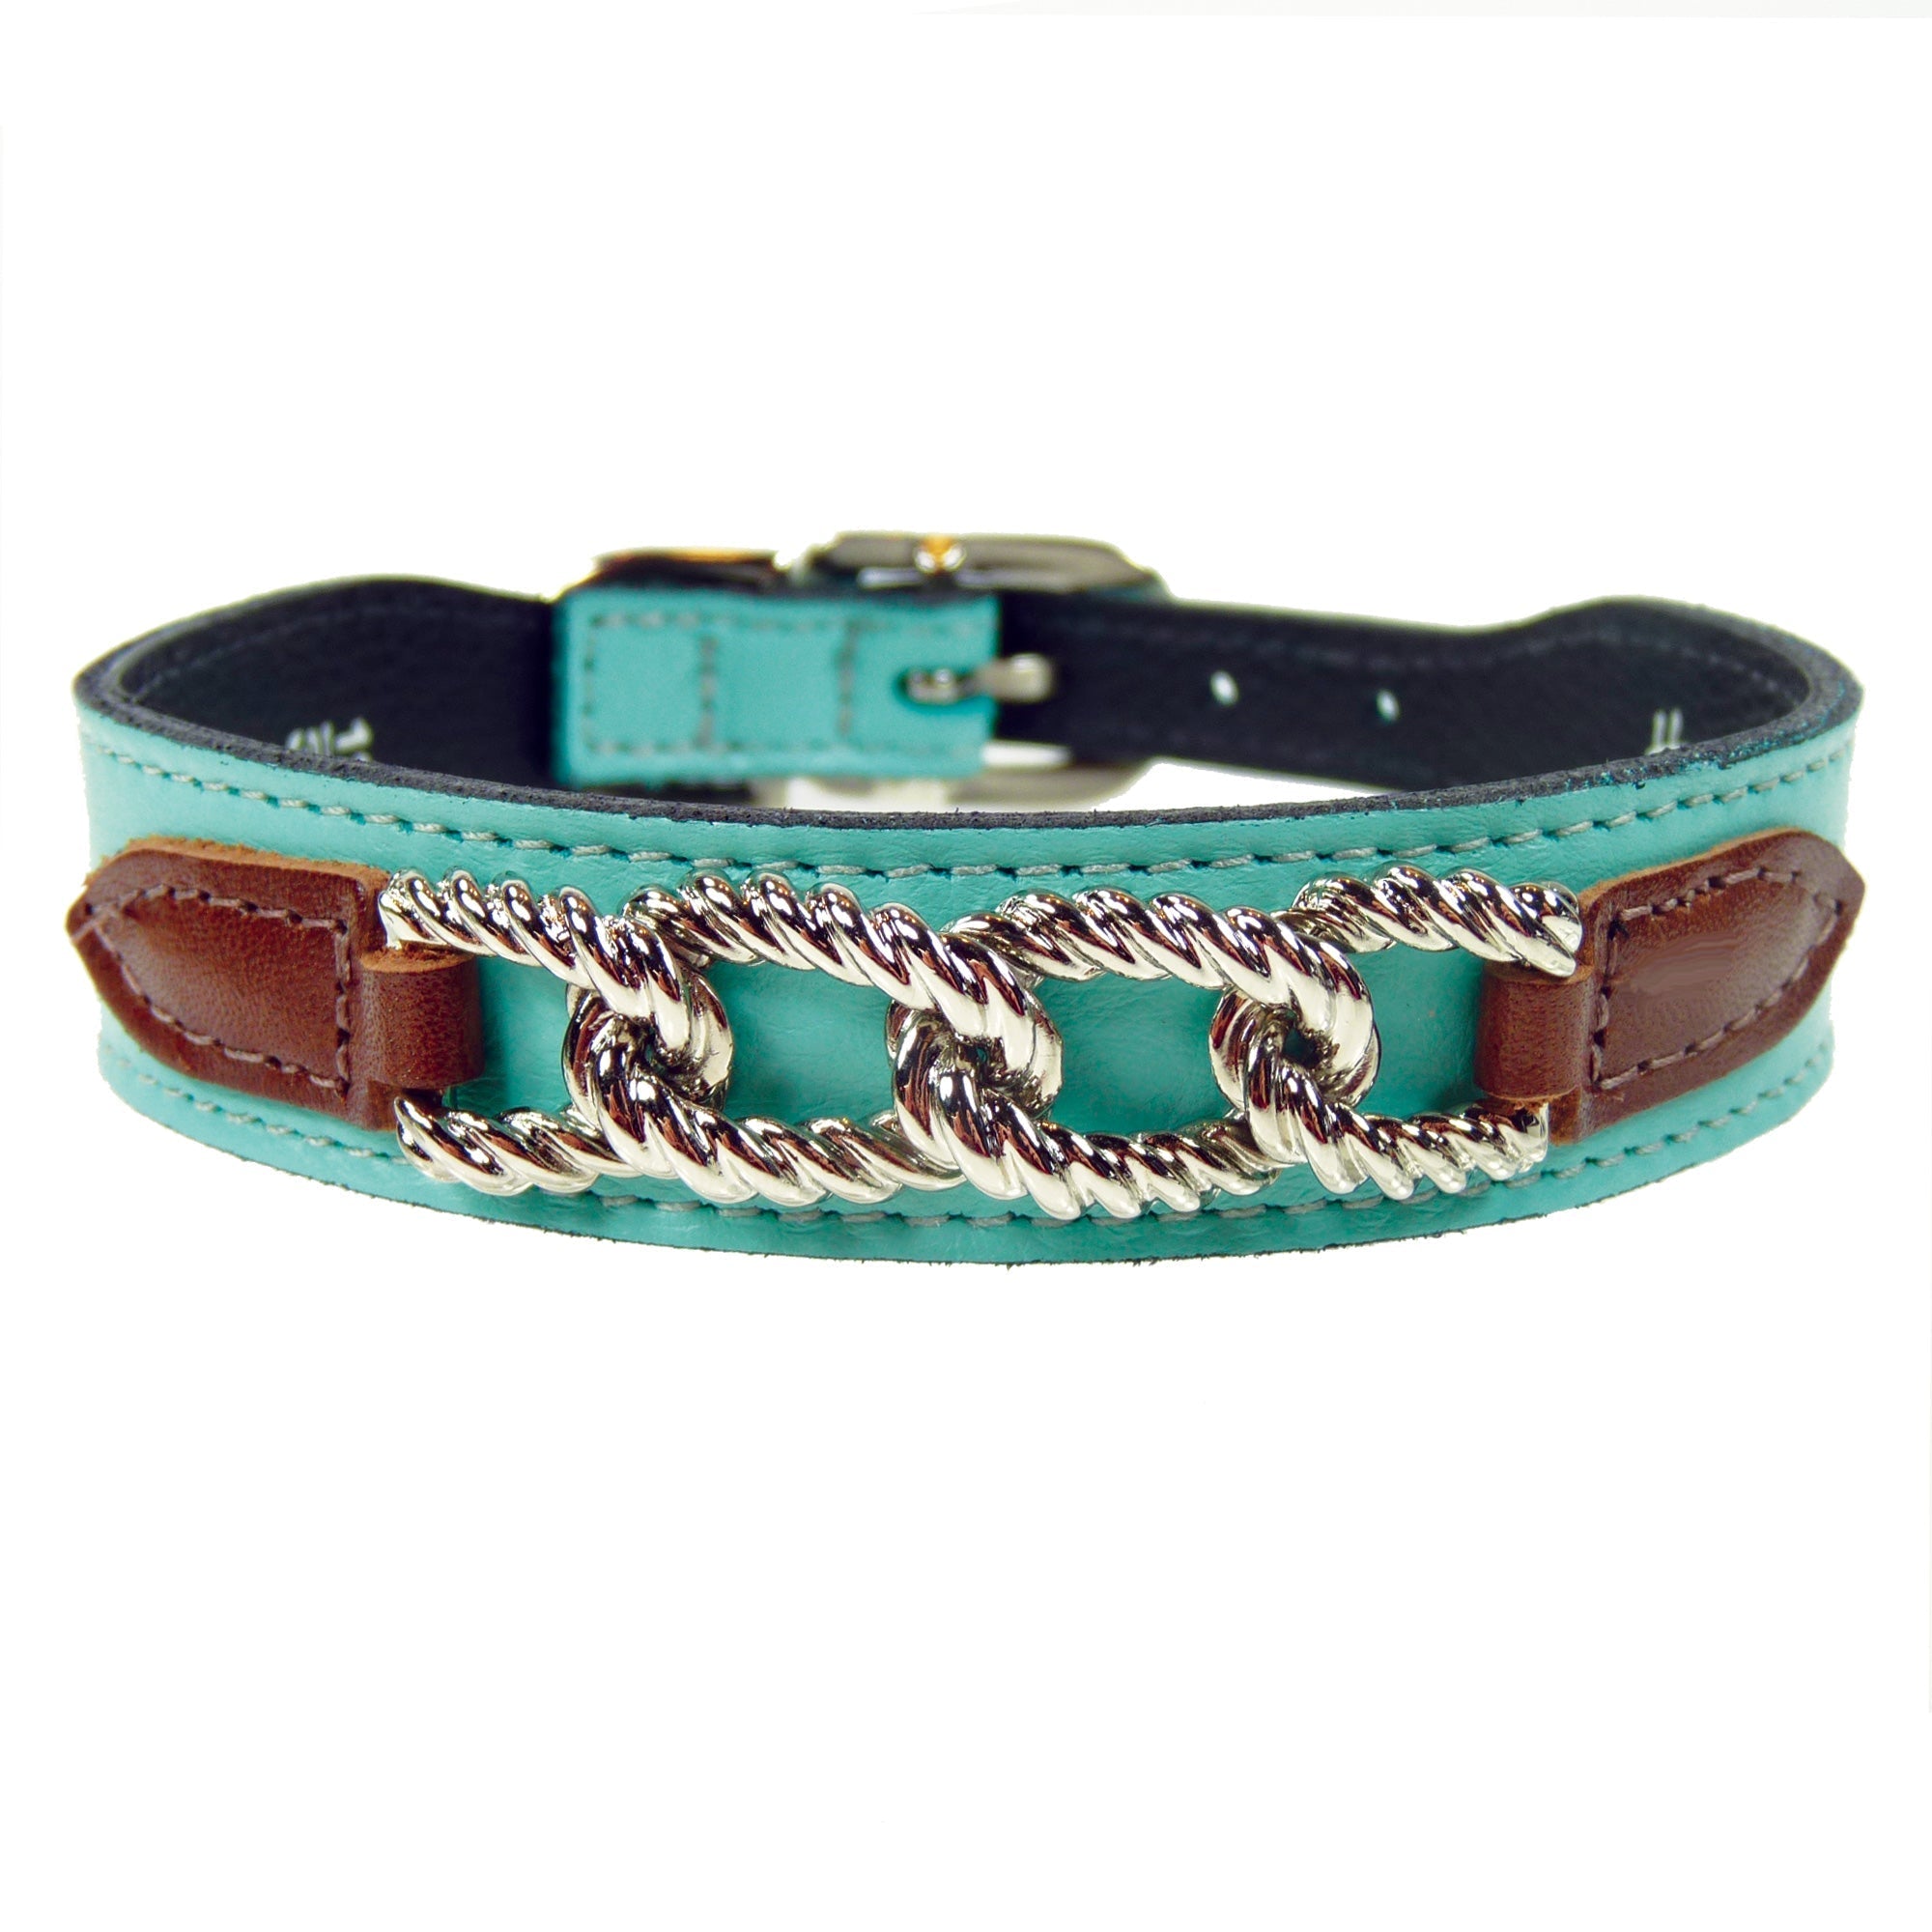 Mayfair in Turquoise & Chocolate